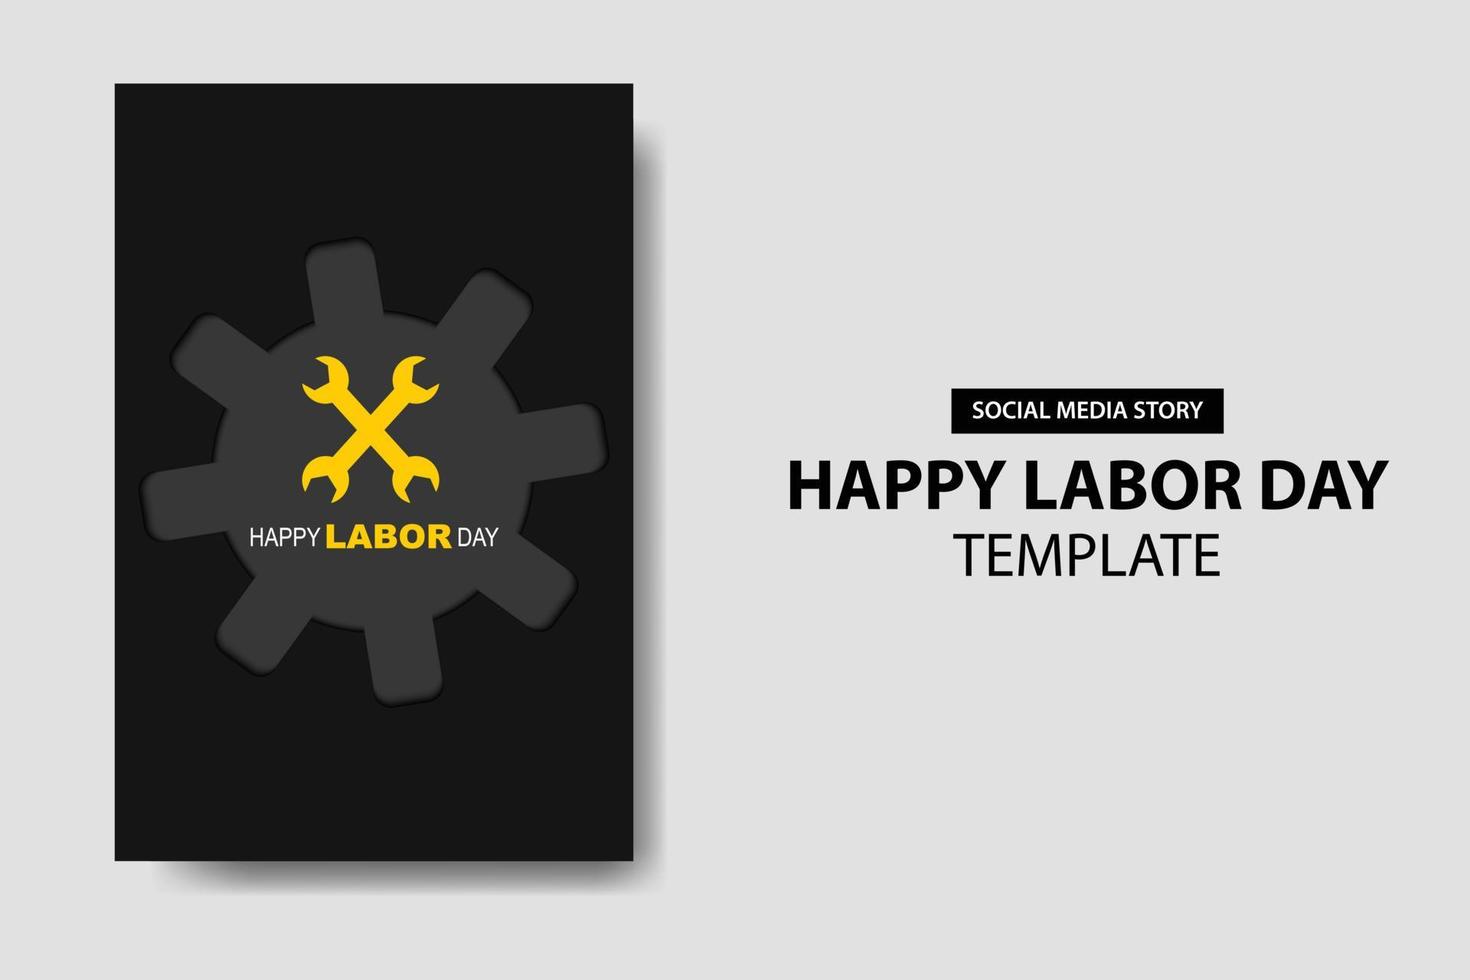 Happy Labor Day Story Template vector